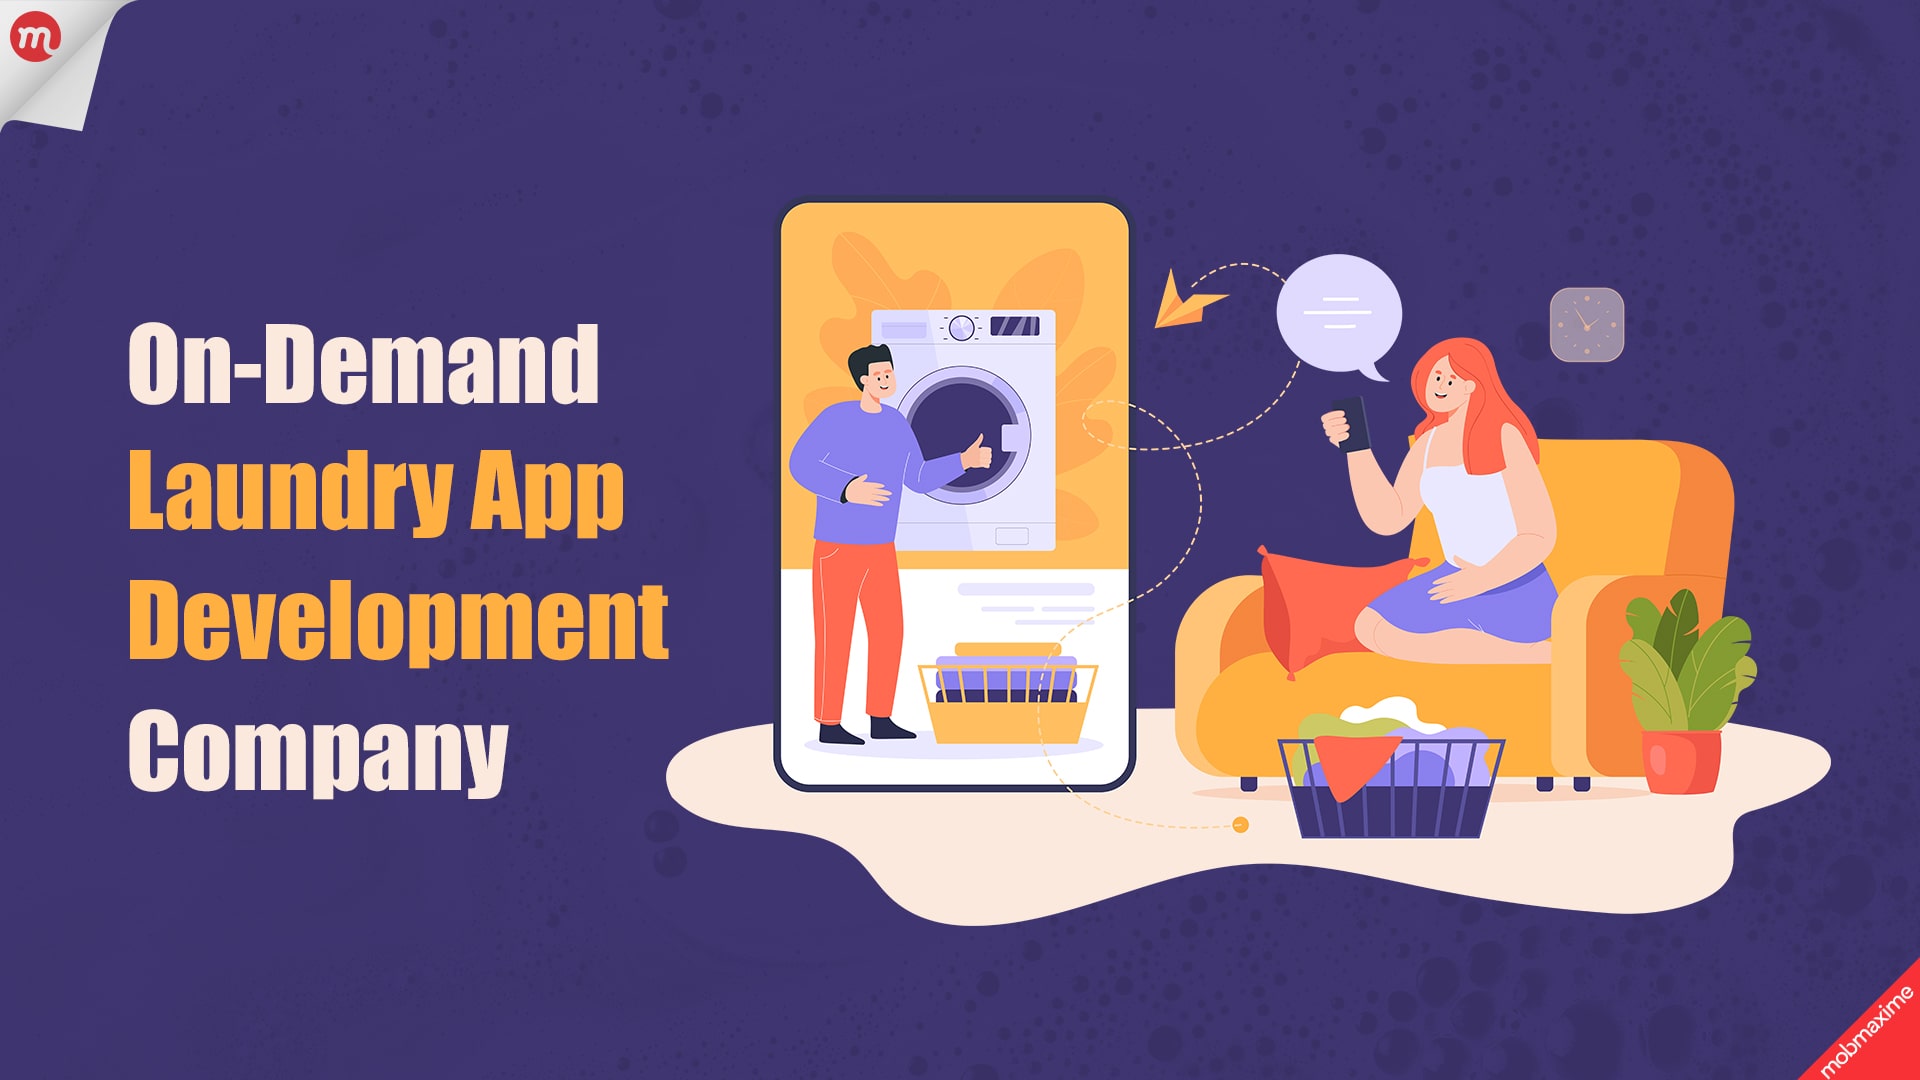 On-Demand Laundry App Development Company: A Complete Guide